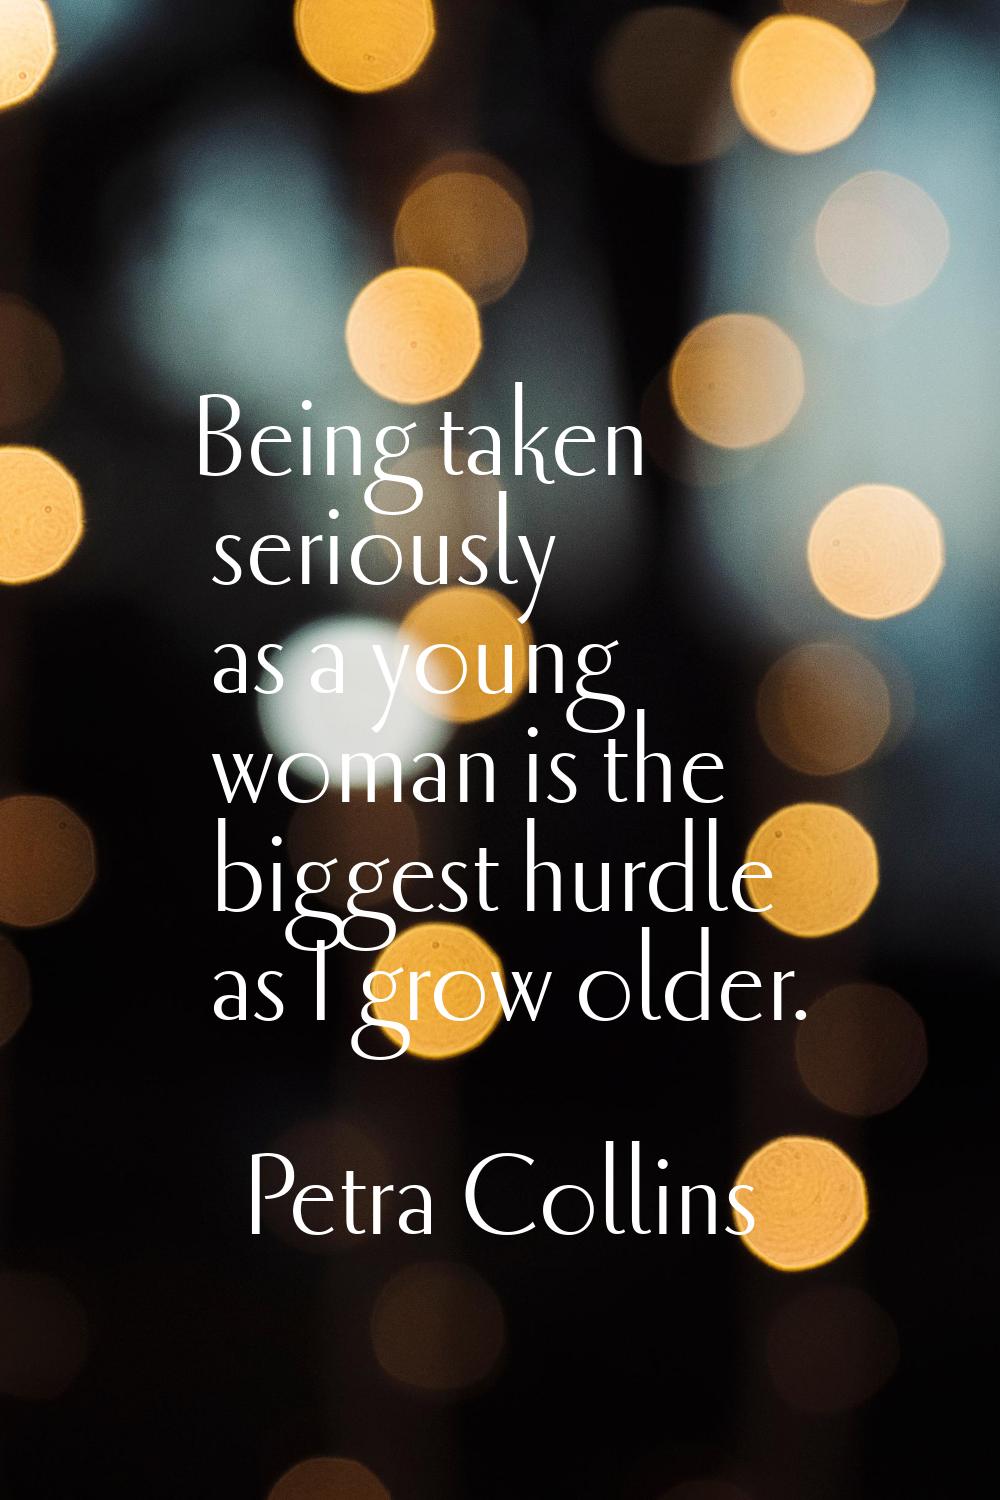 Being taken seriously as a young woman is the biggest hurdle as I grow older.